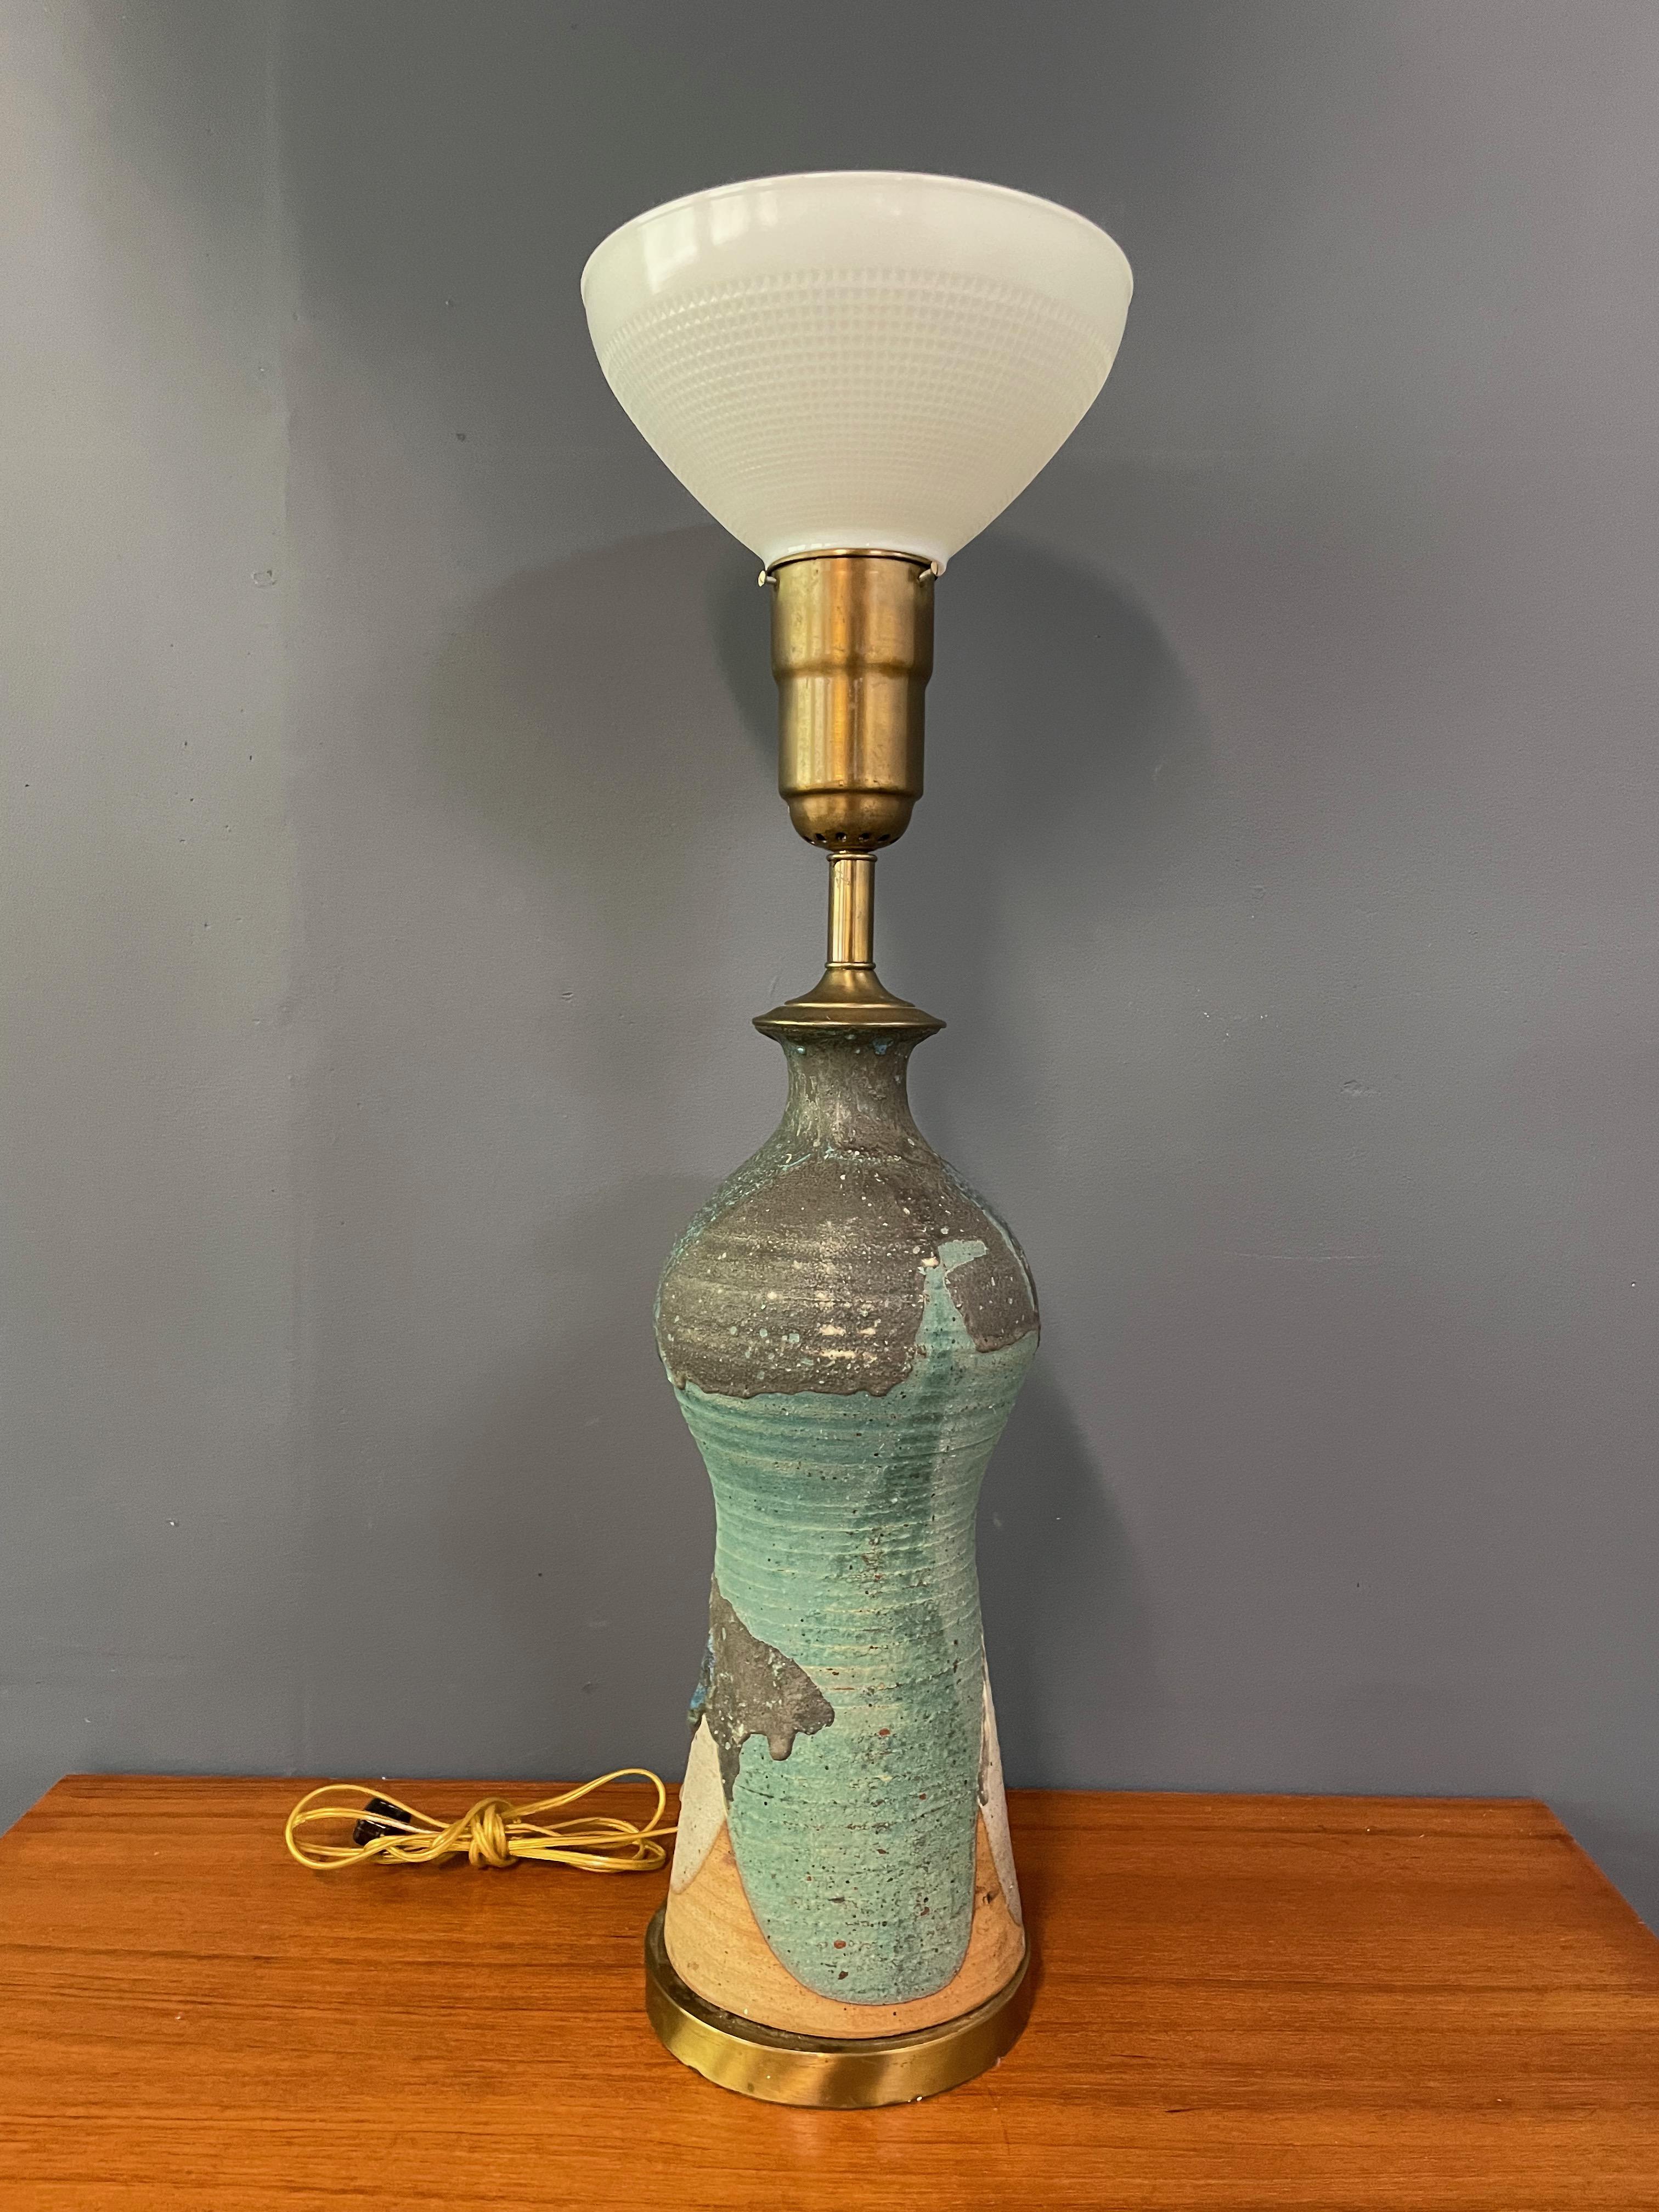 North American Harry Holl For Scargo Pottery Large Ceramic Lamp From His Personal Collection For Sale